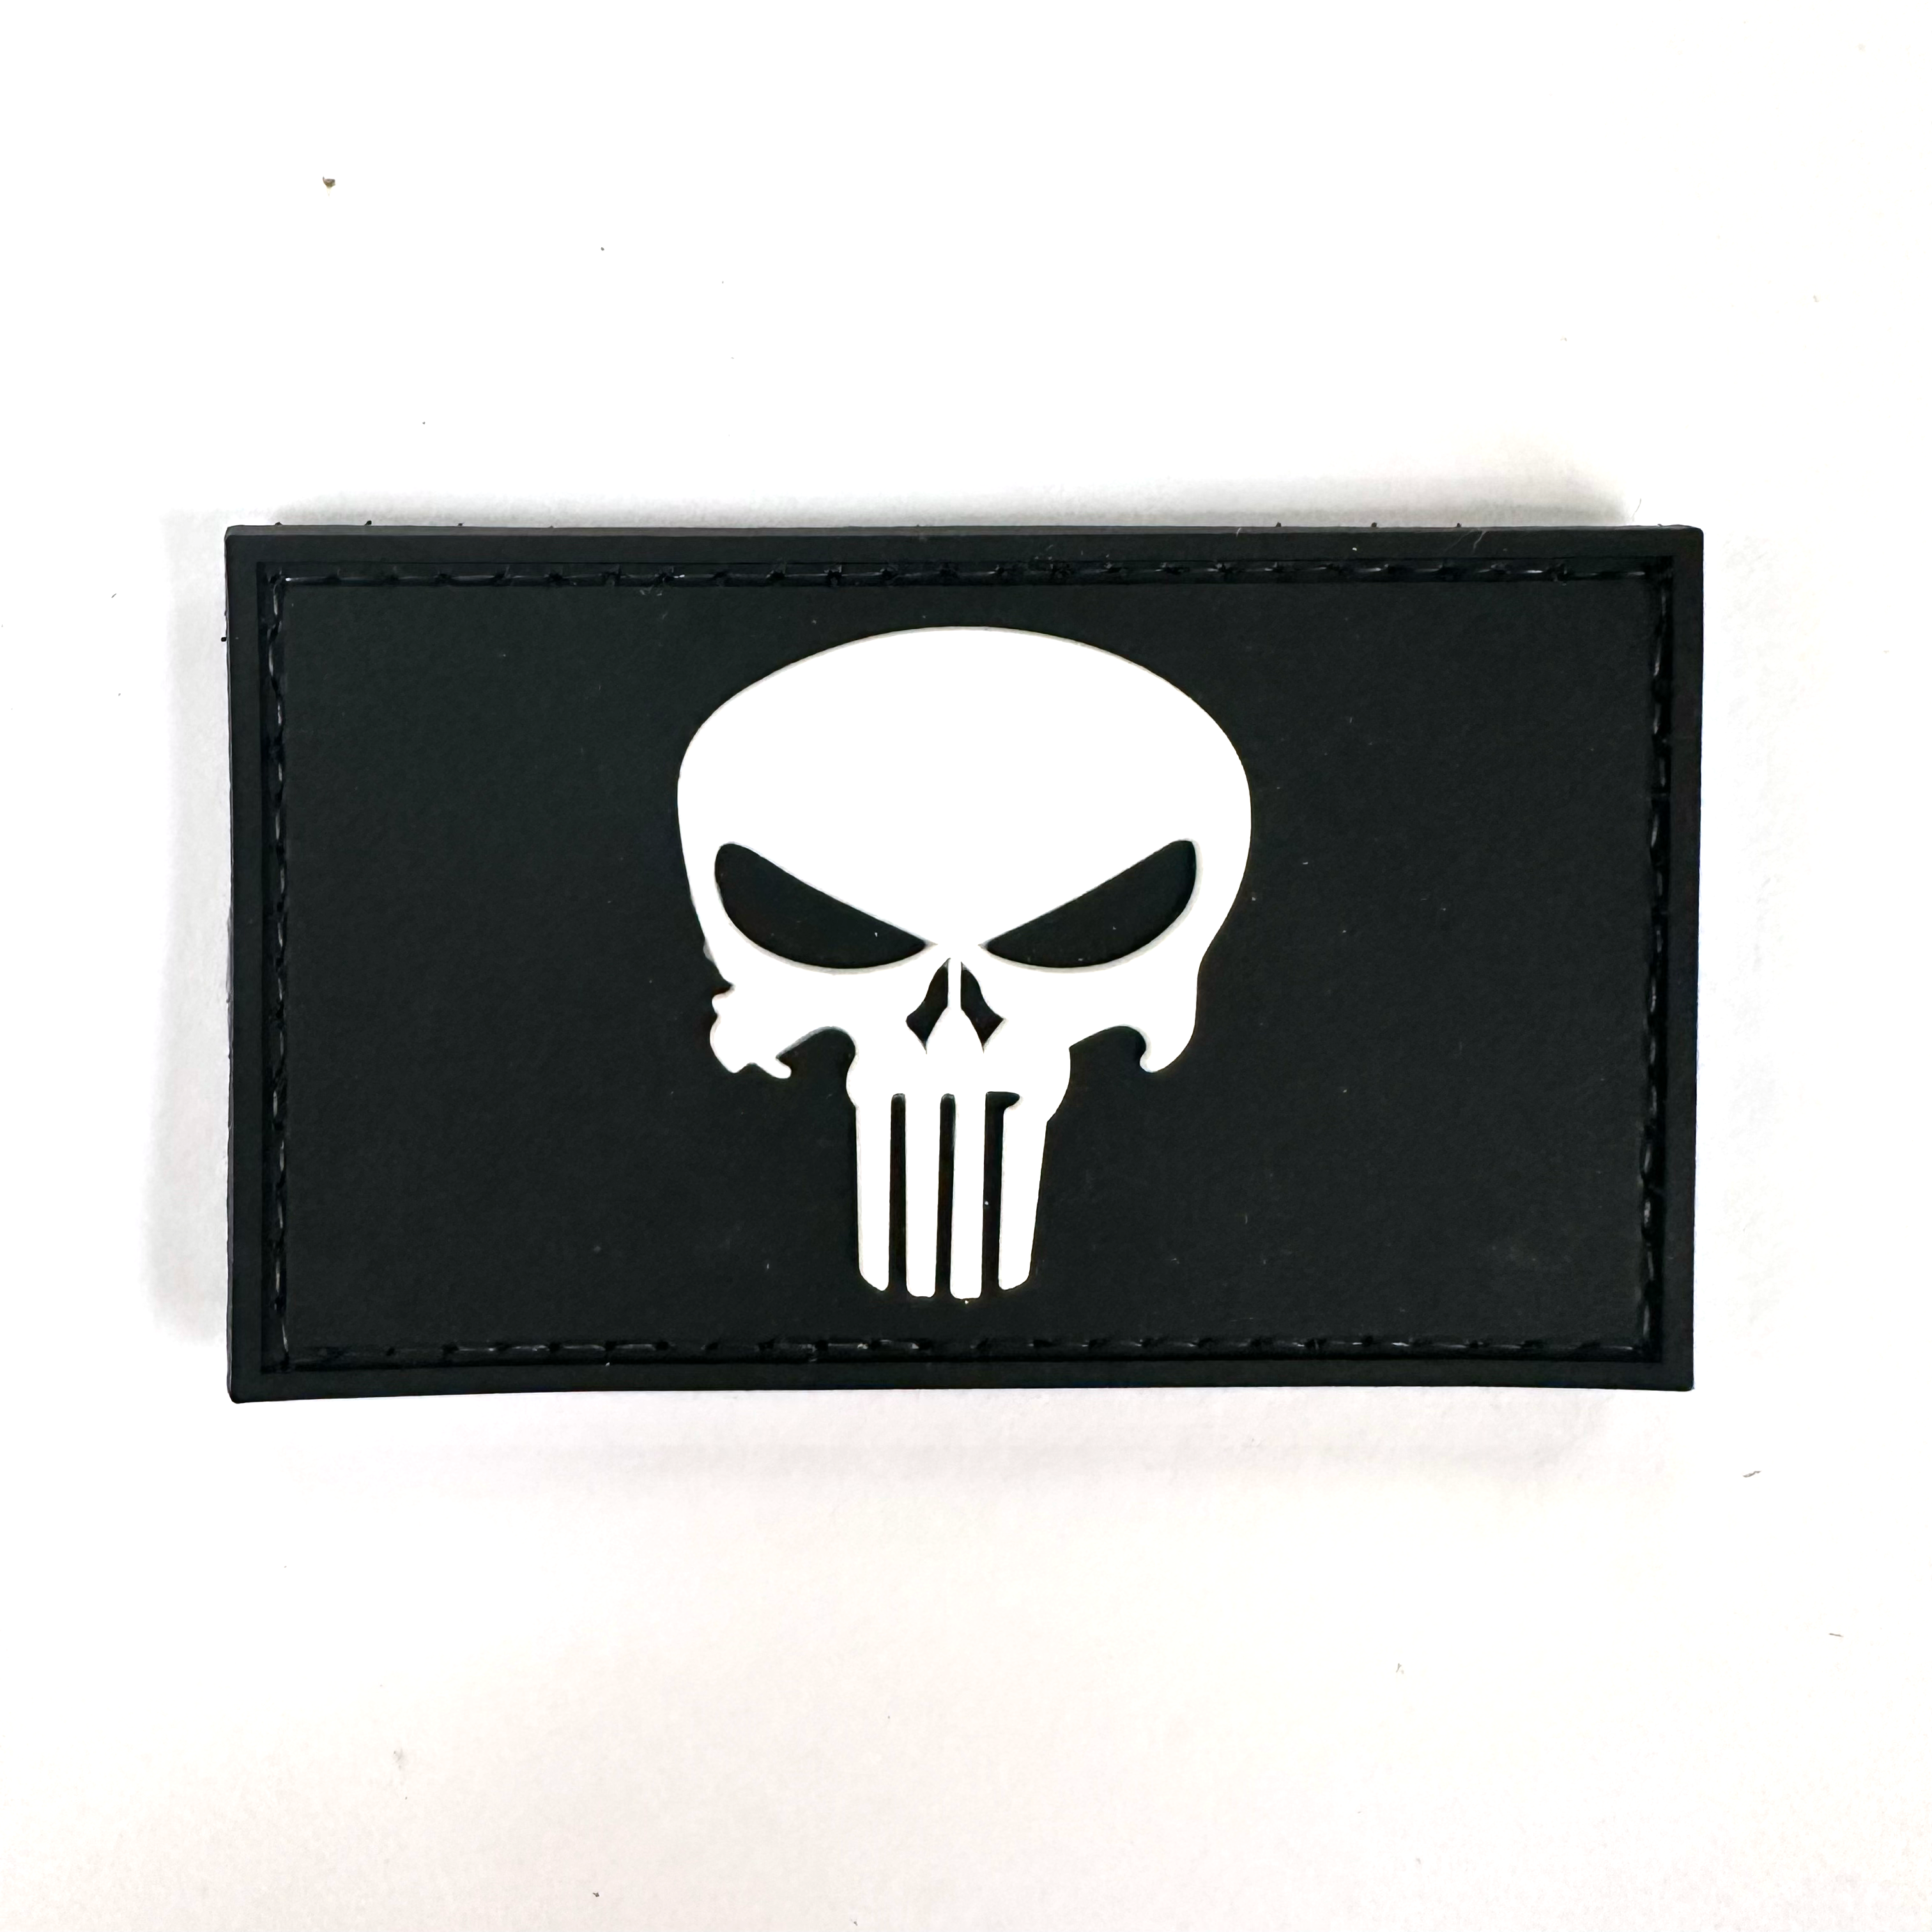 PVC Velcro Patch -  Punisher Skull Black and White - RPI Supplies